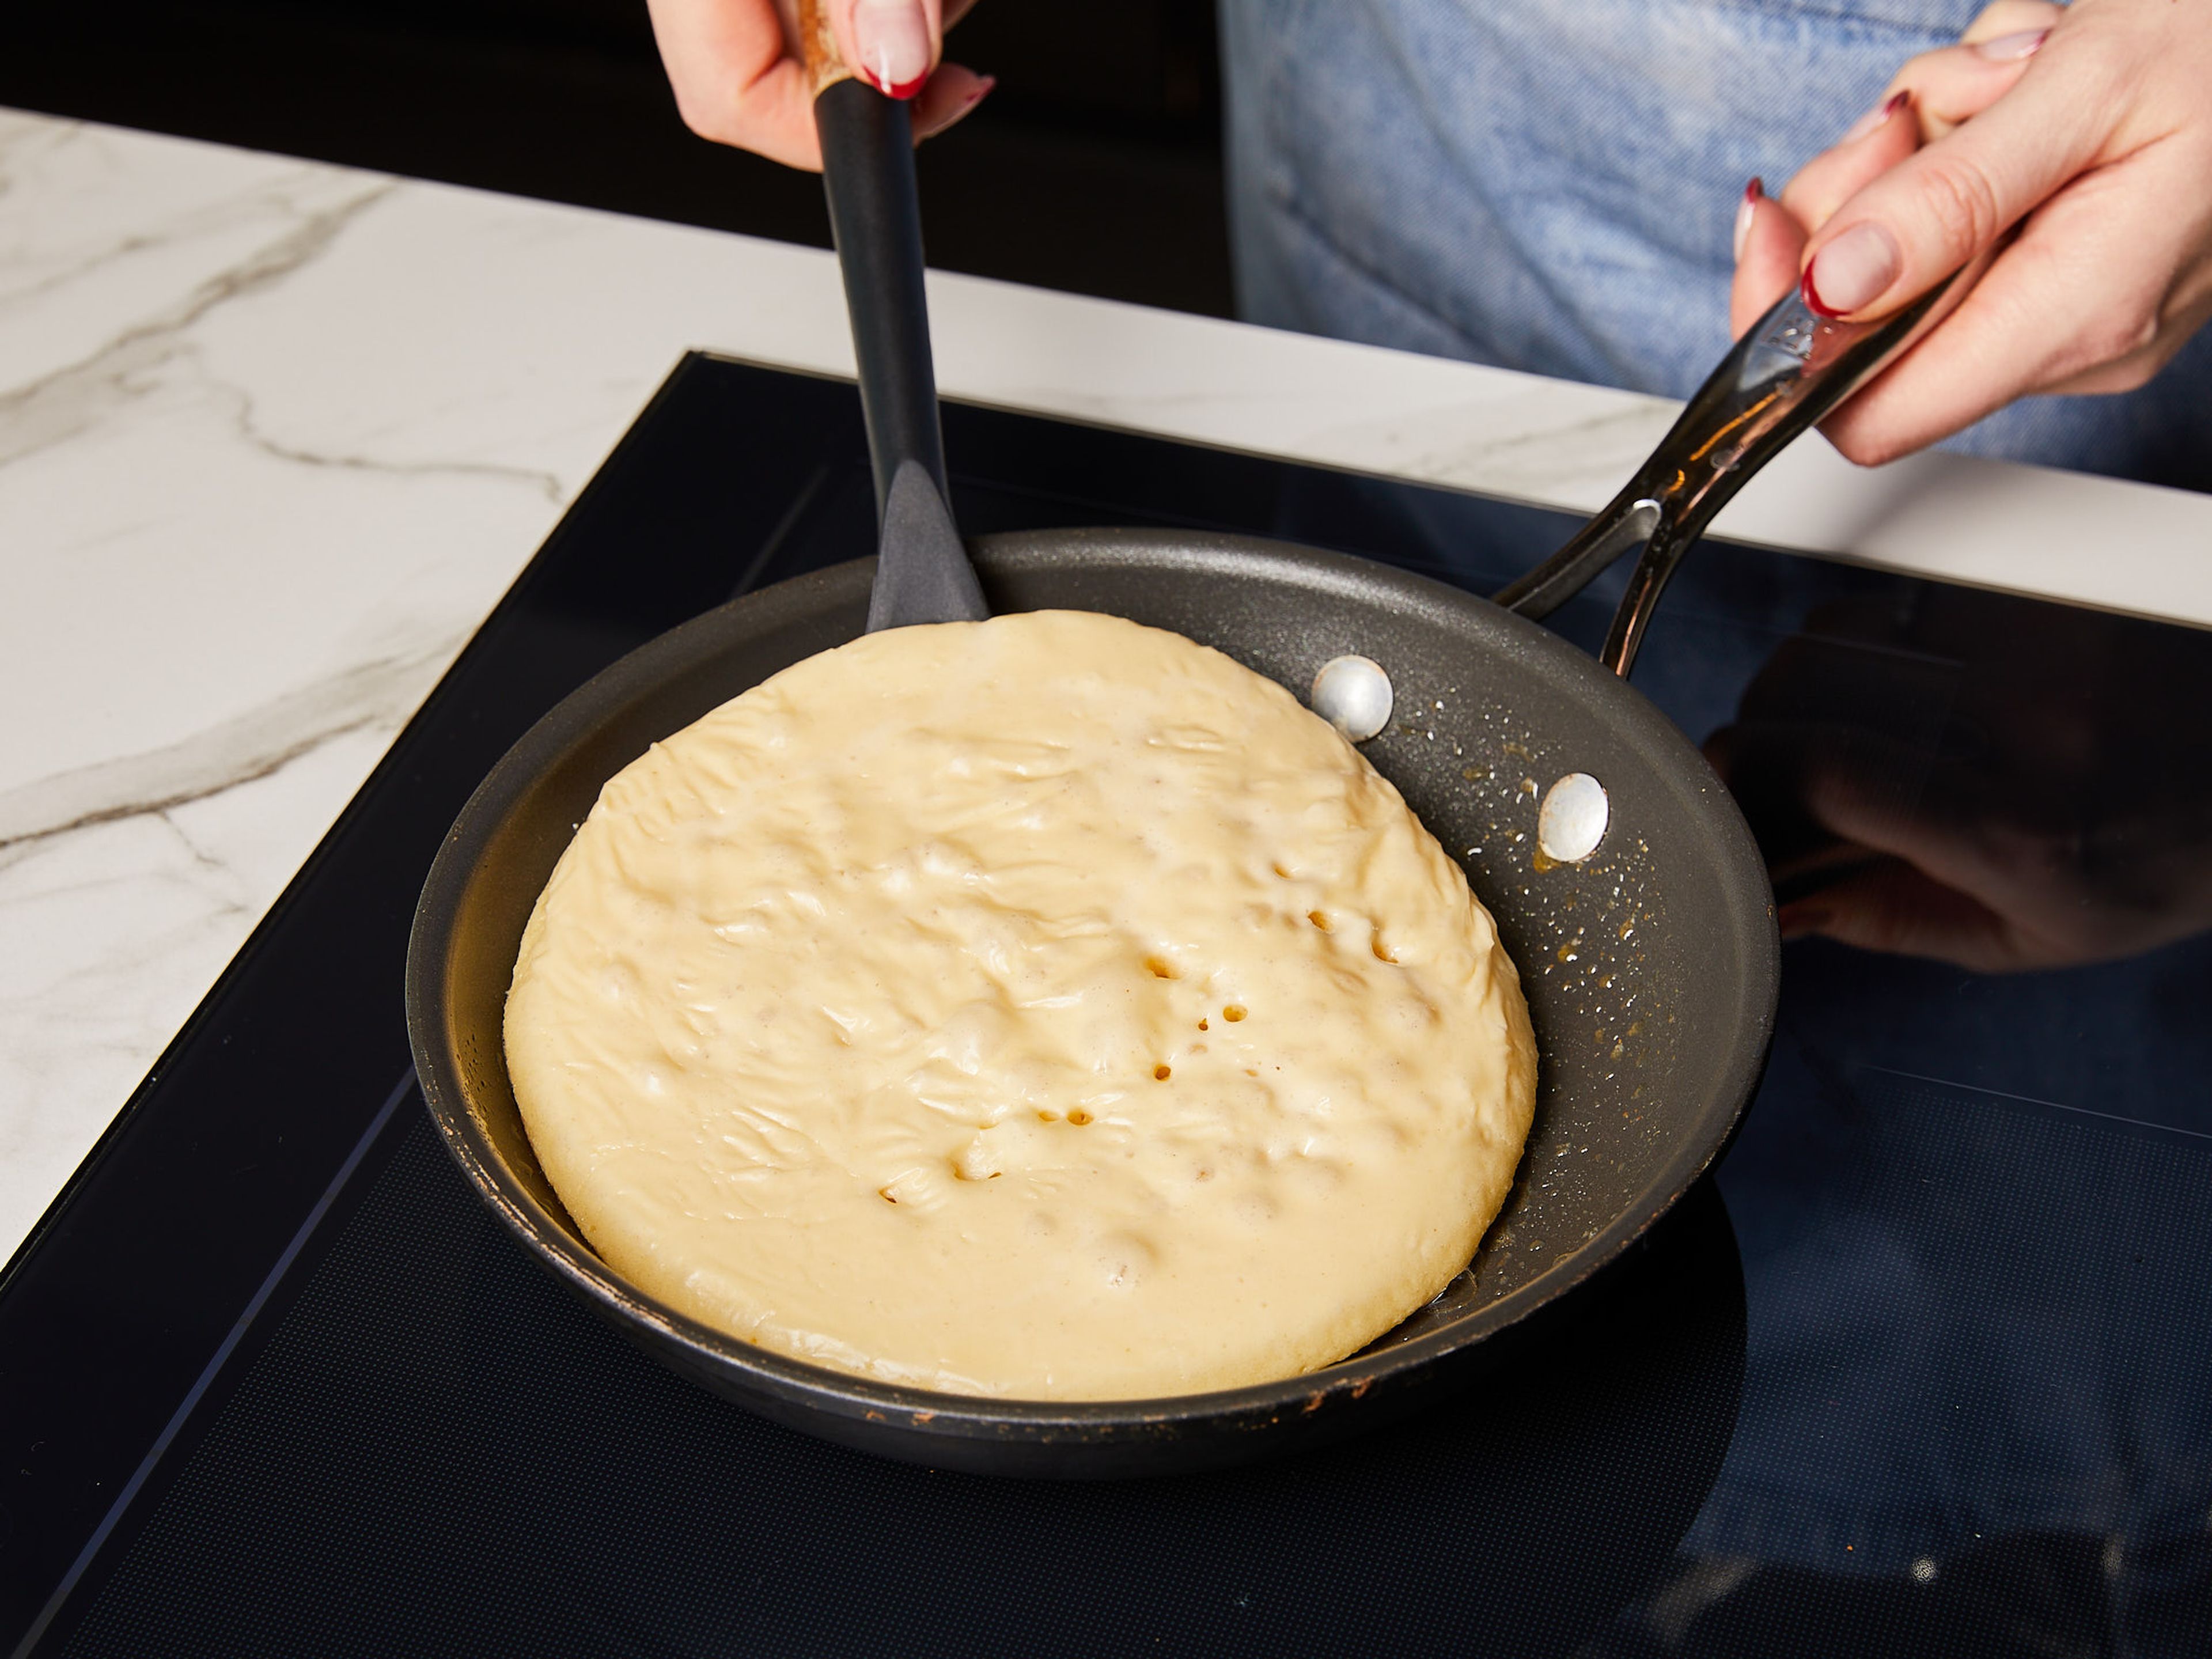 Melt some butter in a pan over medium heat and pour your batter into the pan in batches. When bubbles form on the surface, flip the pancake and let it cook for another 1–2 min. until golden brown. Use more butter to prevent sticking or burning. Transfer to a plate and enjoy with butter and maple syrup.